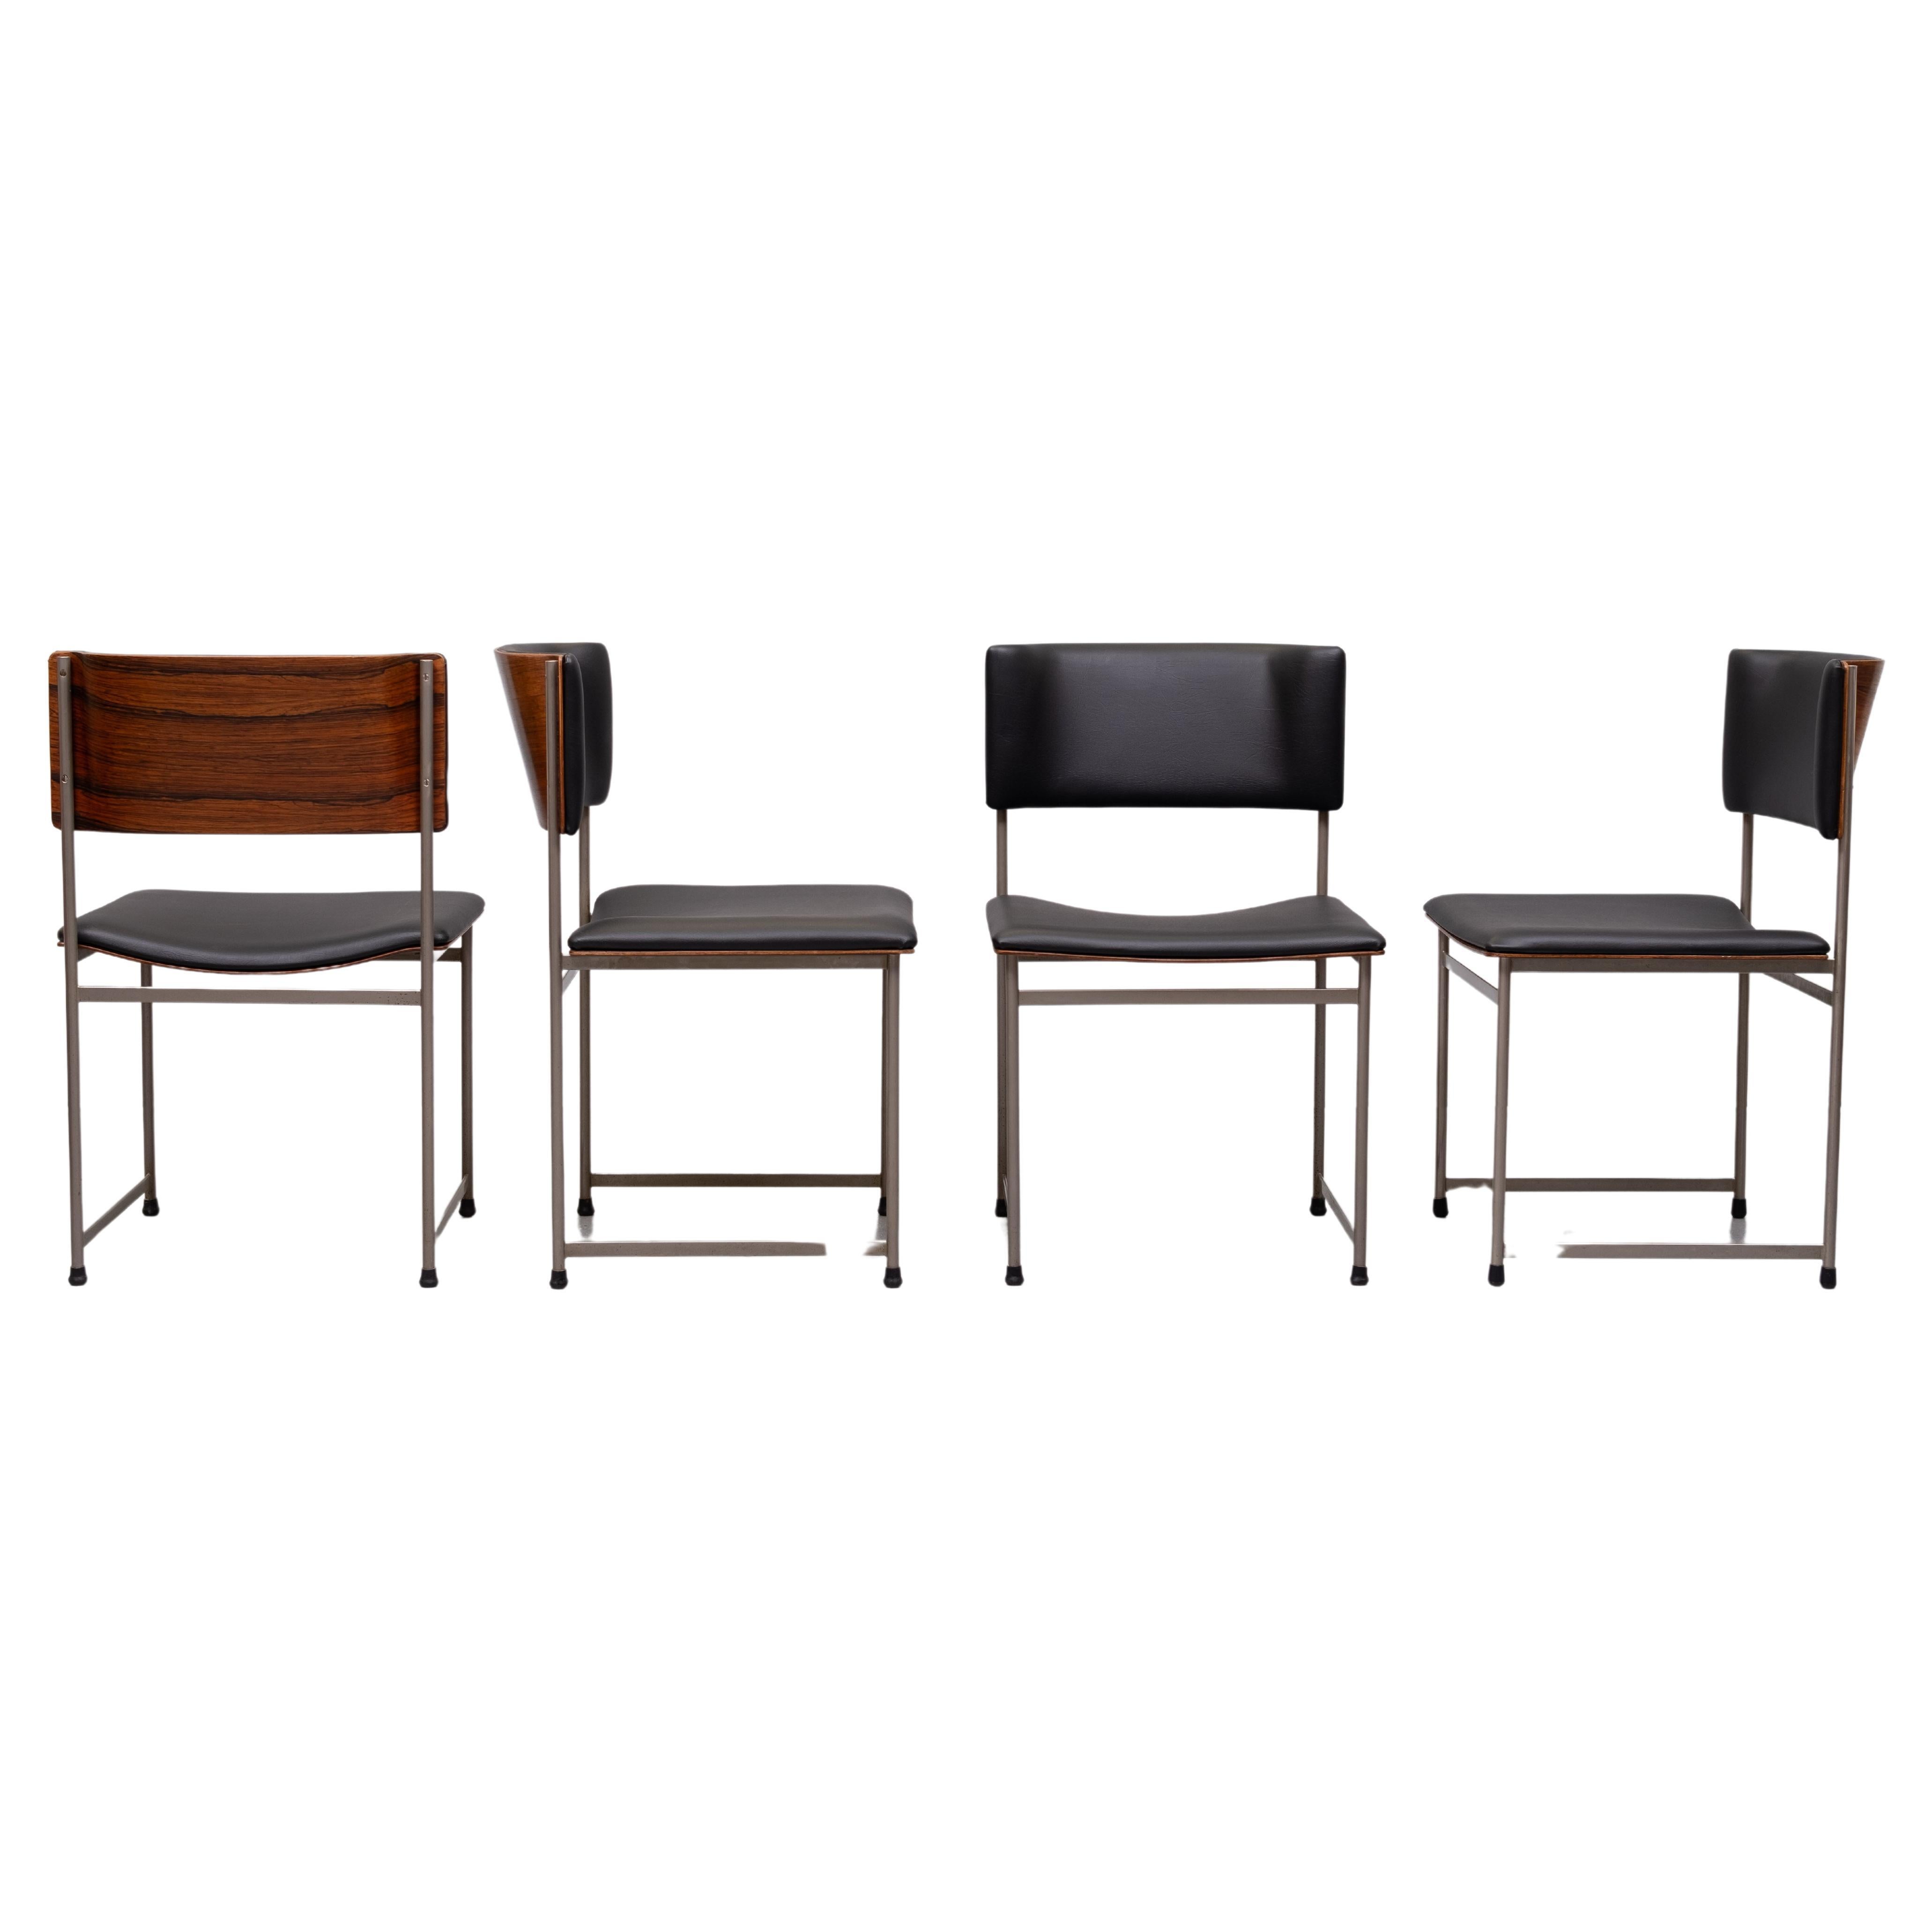 What is the difference between a side chair and a Parsons chair?